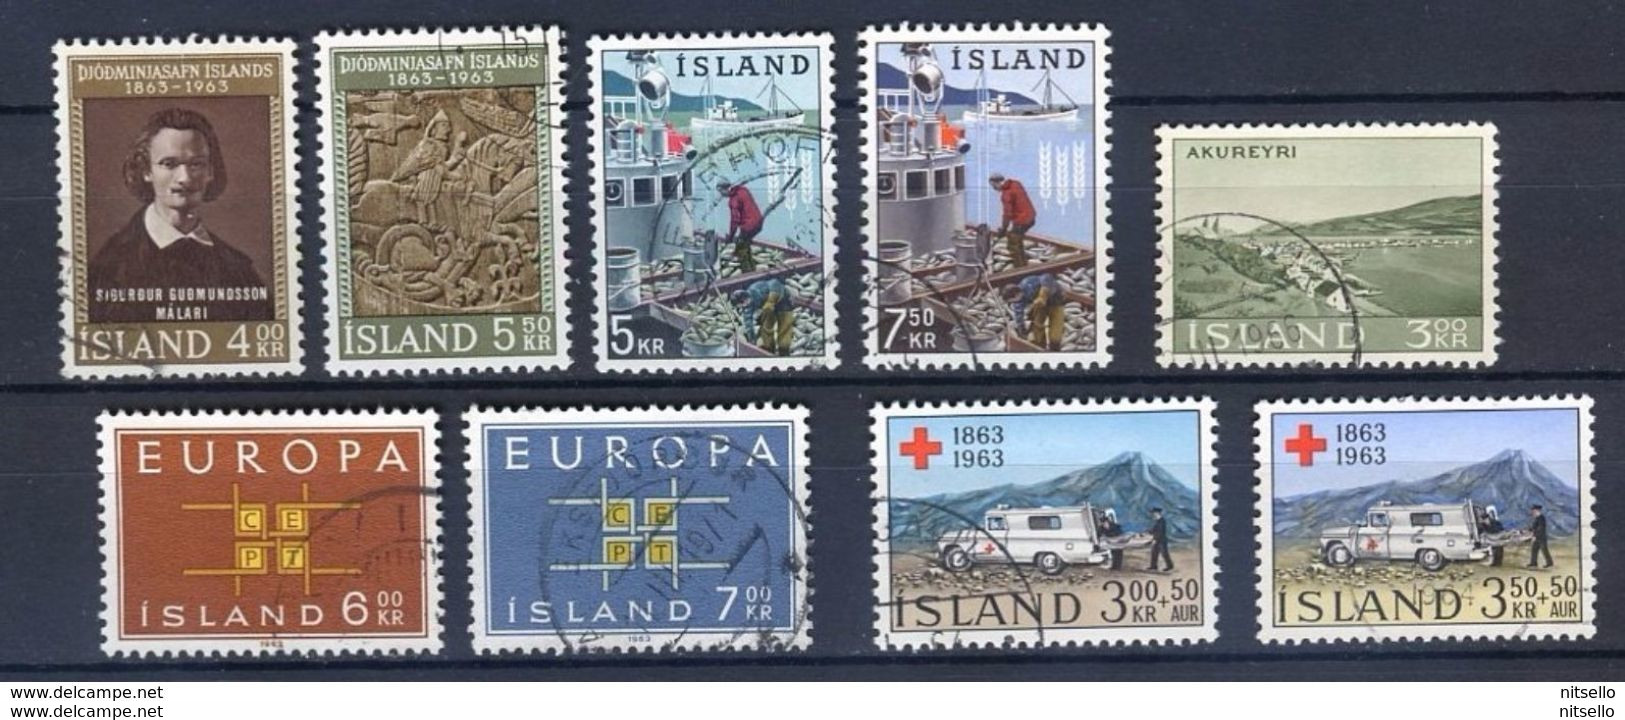 LOTE 2235  ///  (C075) ISLANDIA   AÑO 1963 COMPLETO - Used Stamps